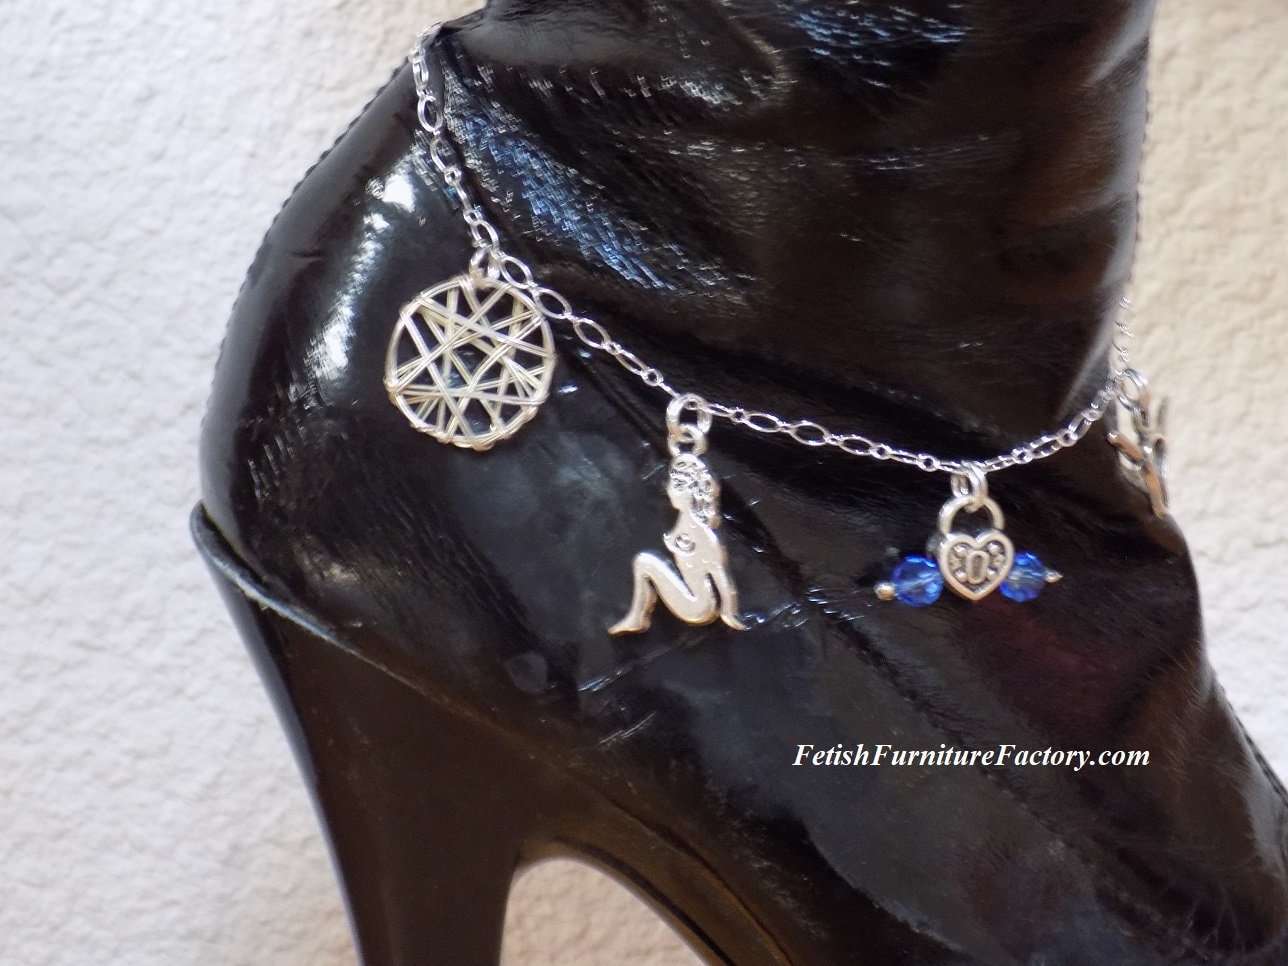 Mature Hotwife Anklet, Hotwife Charms, BDSM Jewelry, Cuckold, Sex Toys, Fetish, Kinky Jewelry, FemDom, Dungeon, Body Jewelry, Swingers, picture image